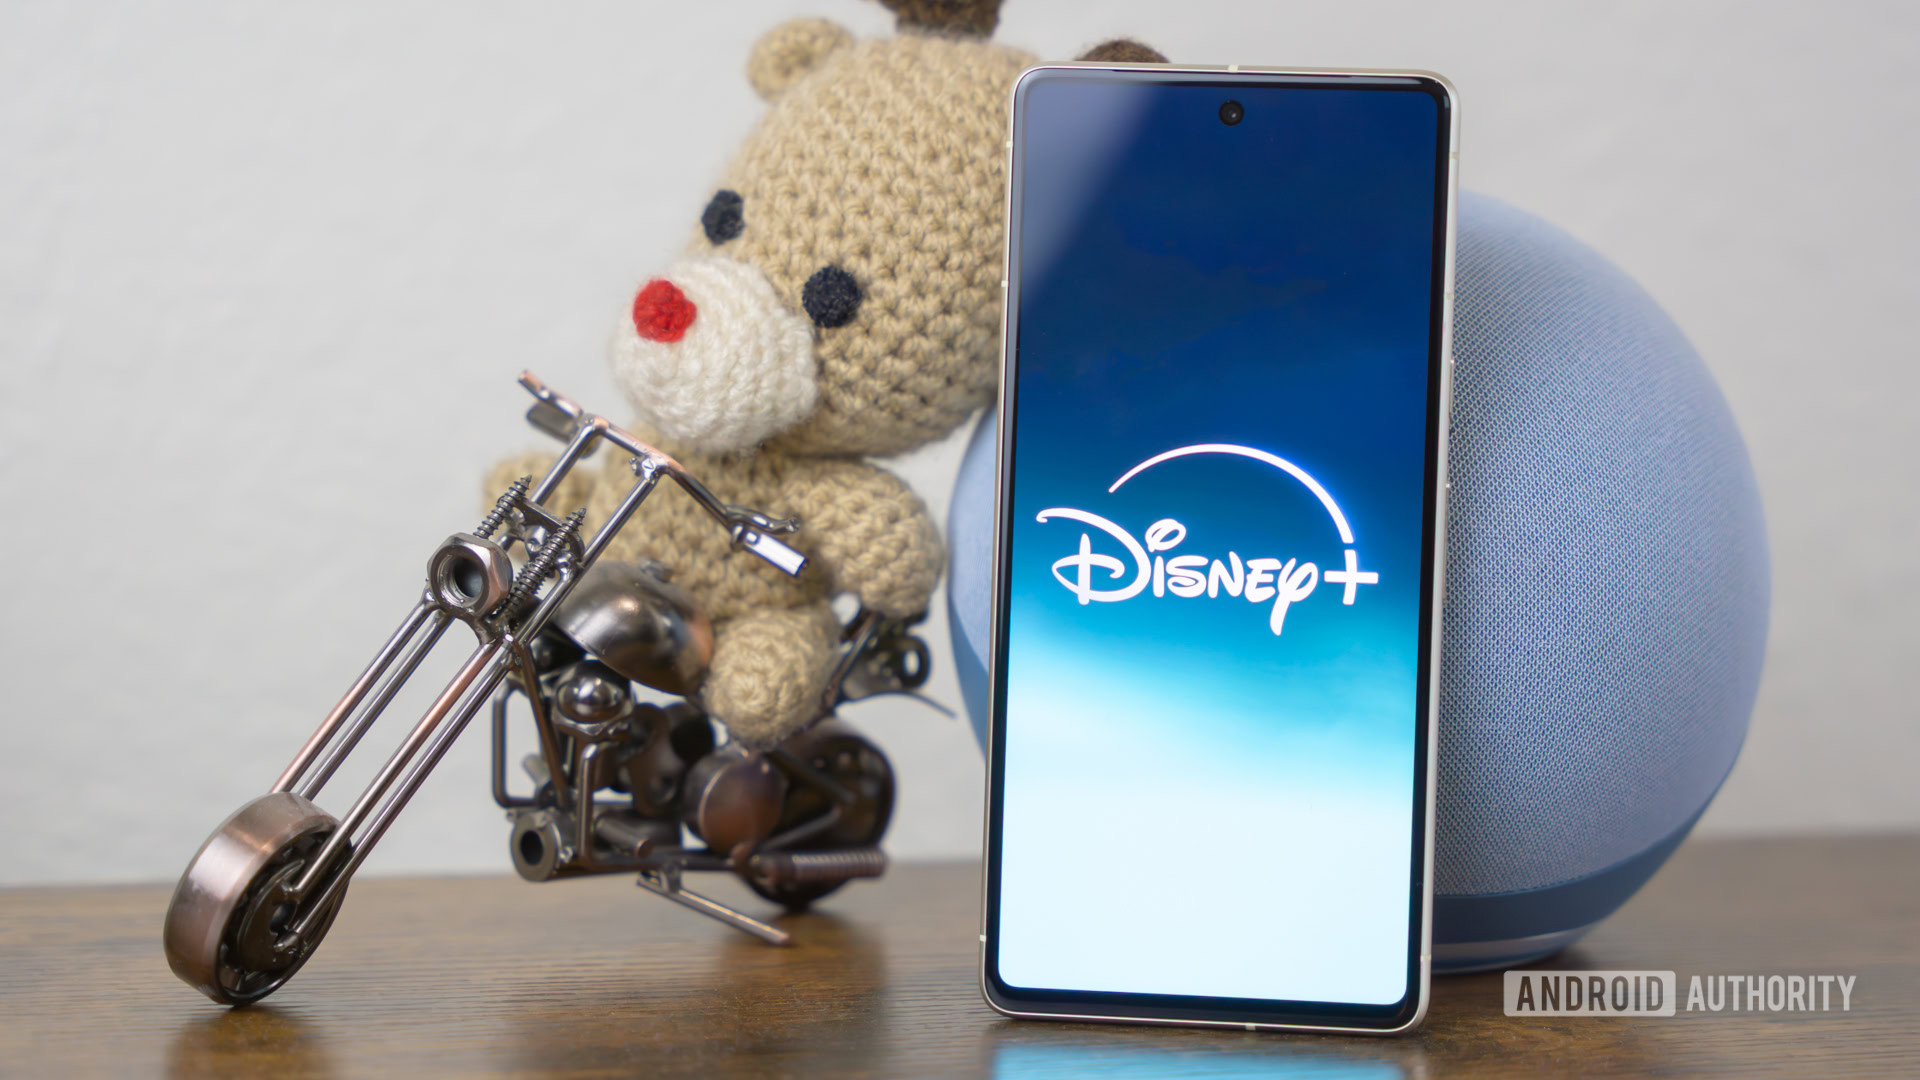 Disney Plus logo on smartphone laying on side table stock photo (3)